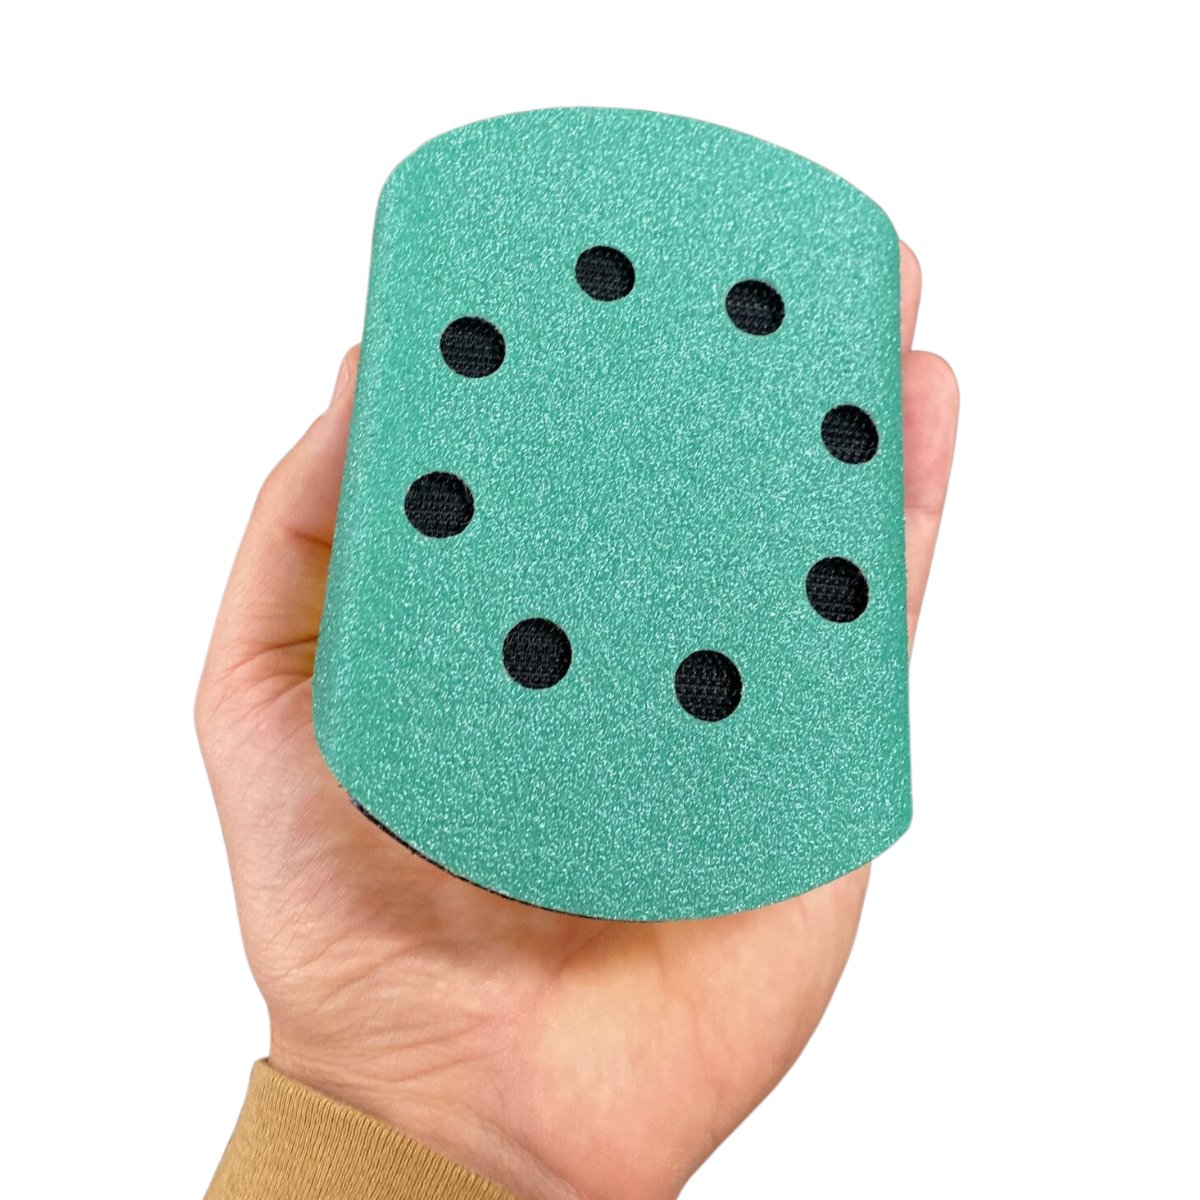 5-Inch Sanding Pad, Reusable Hook and Loop Design, Mouse-Shaped, Yellow - Legit Grit